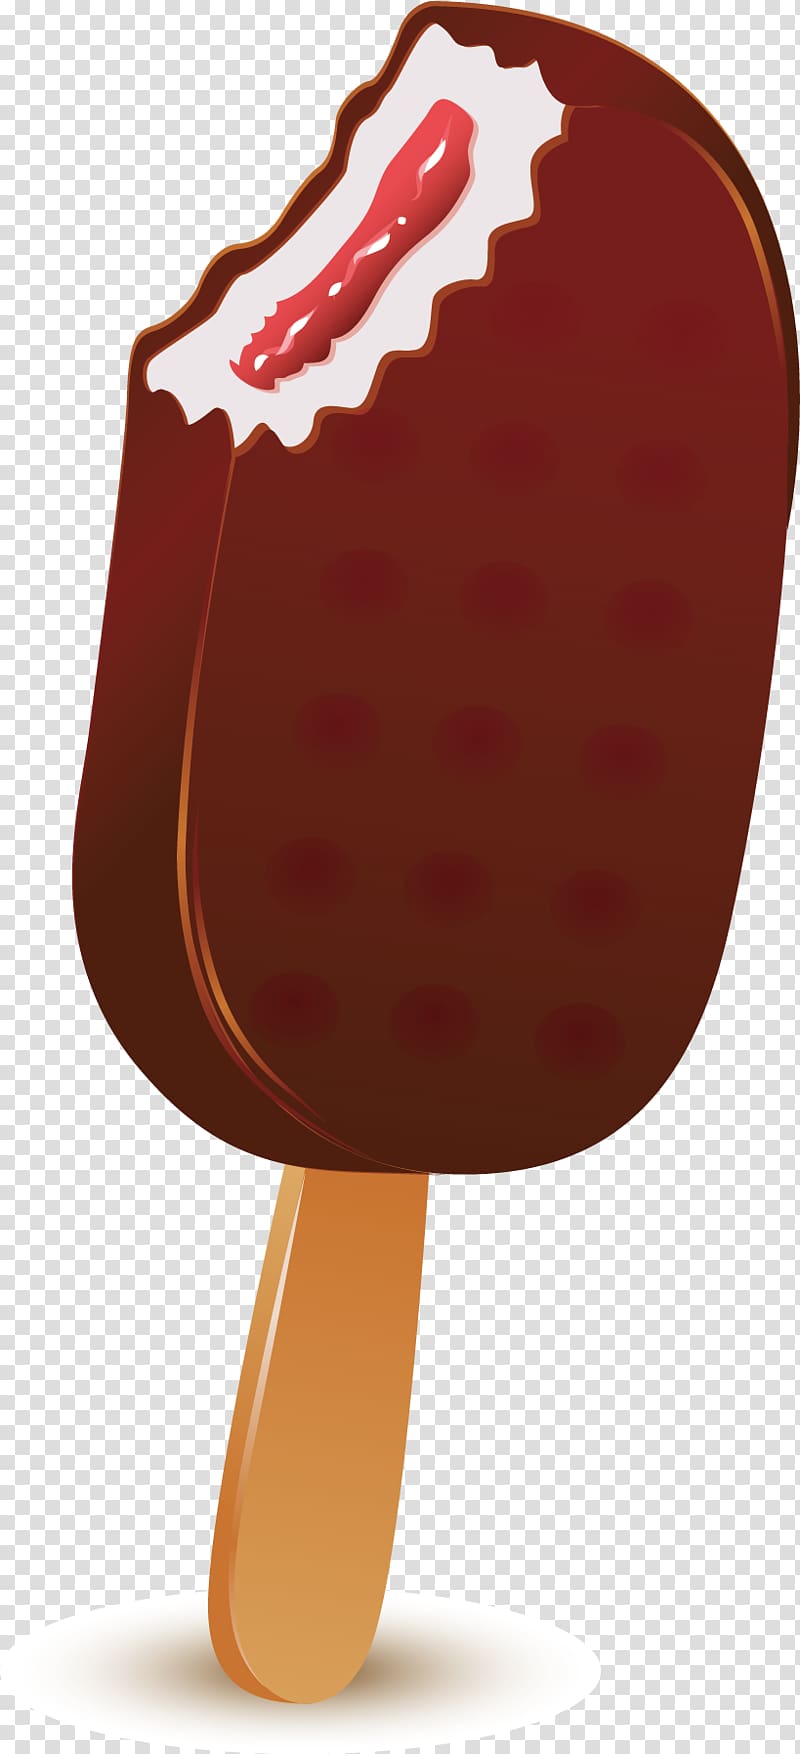 Ice cream Ice pop, Ice cream hand-painted decorative material transparent background PNG clipart